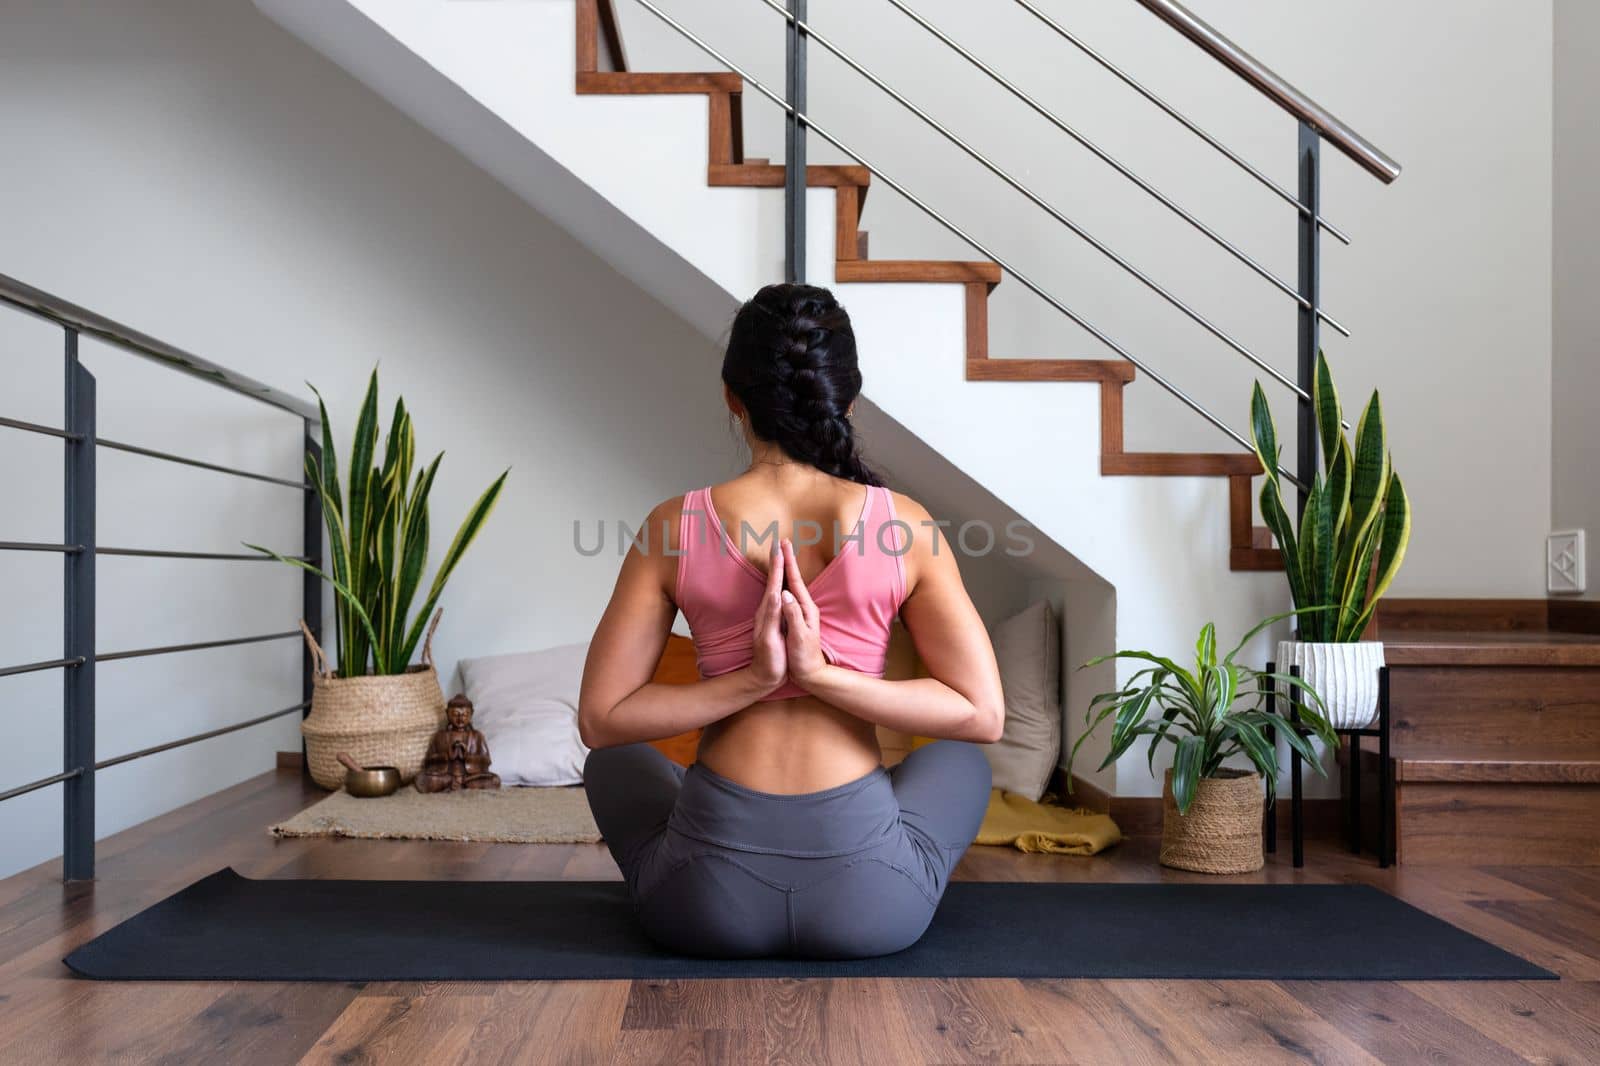 Rear view of young woman doing reverse prayer yoga pose at home living room. Female yogi doing namaste mudra behind back. Lifestyle and spirituality concept.